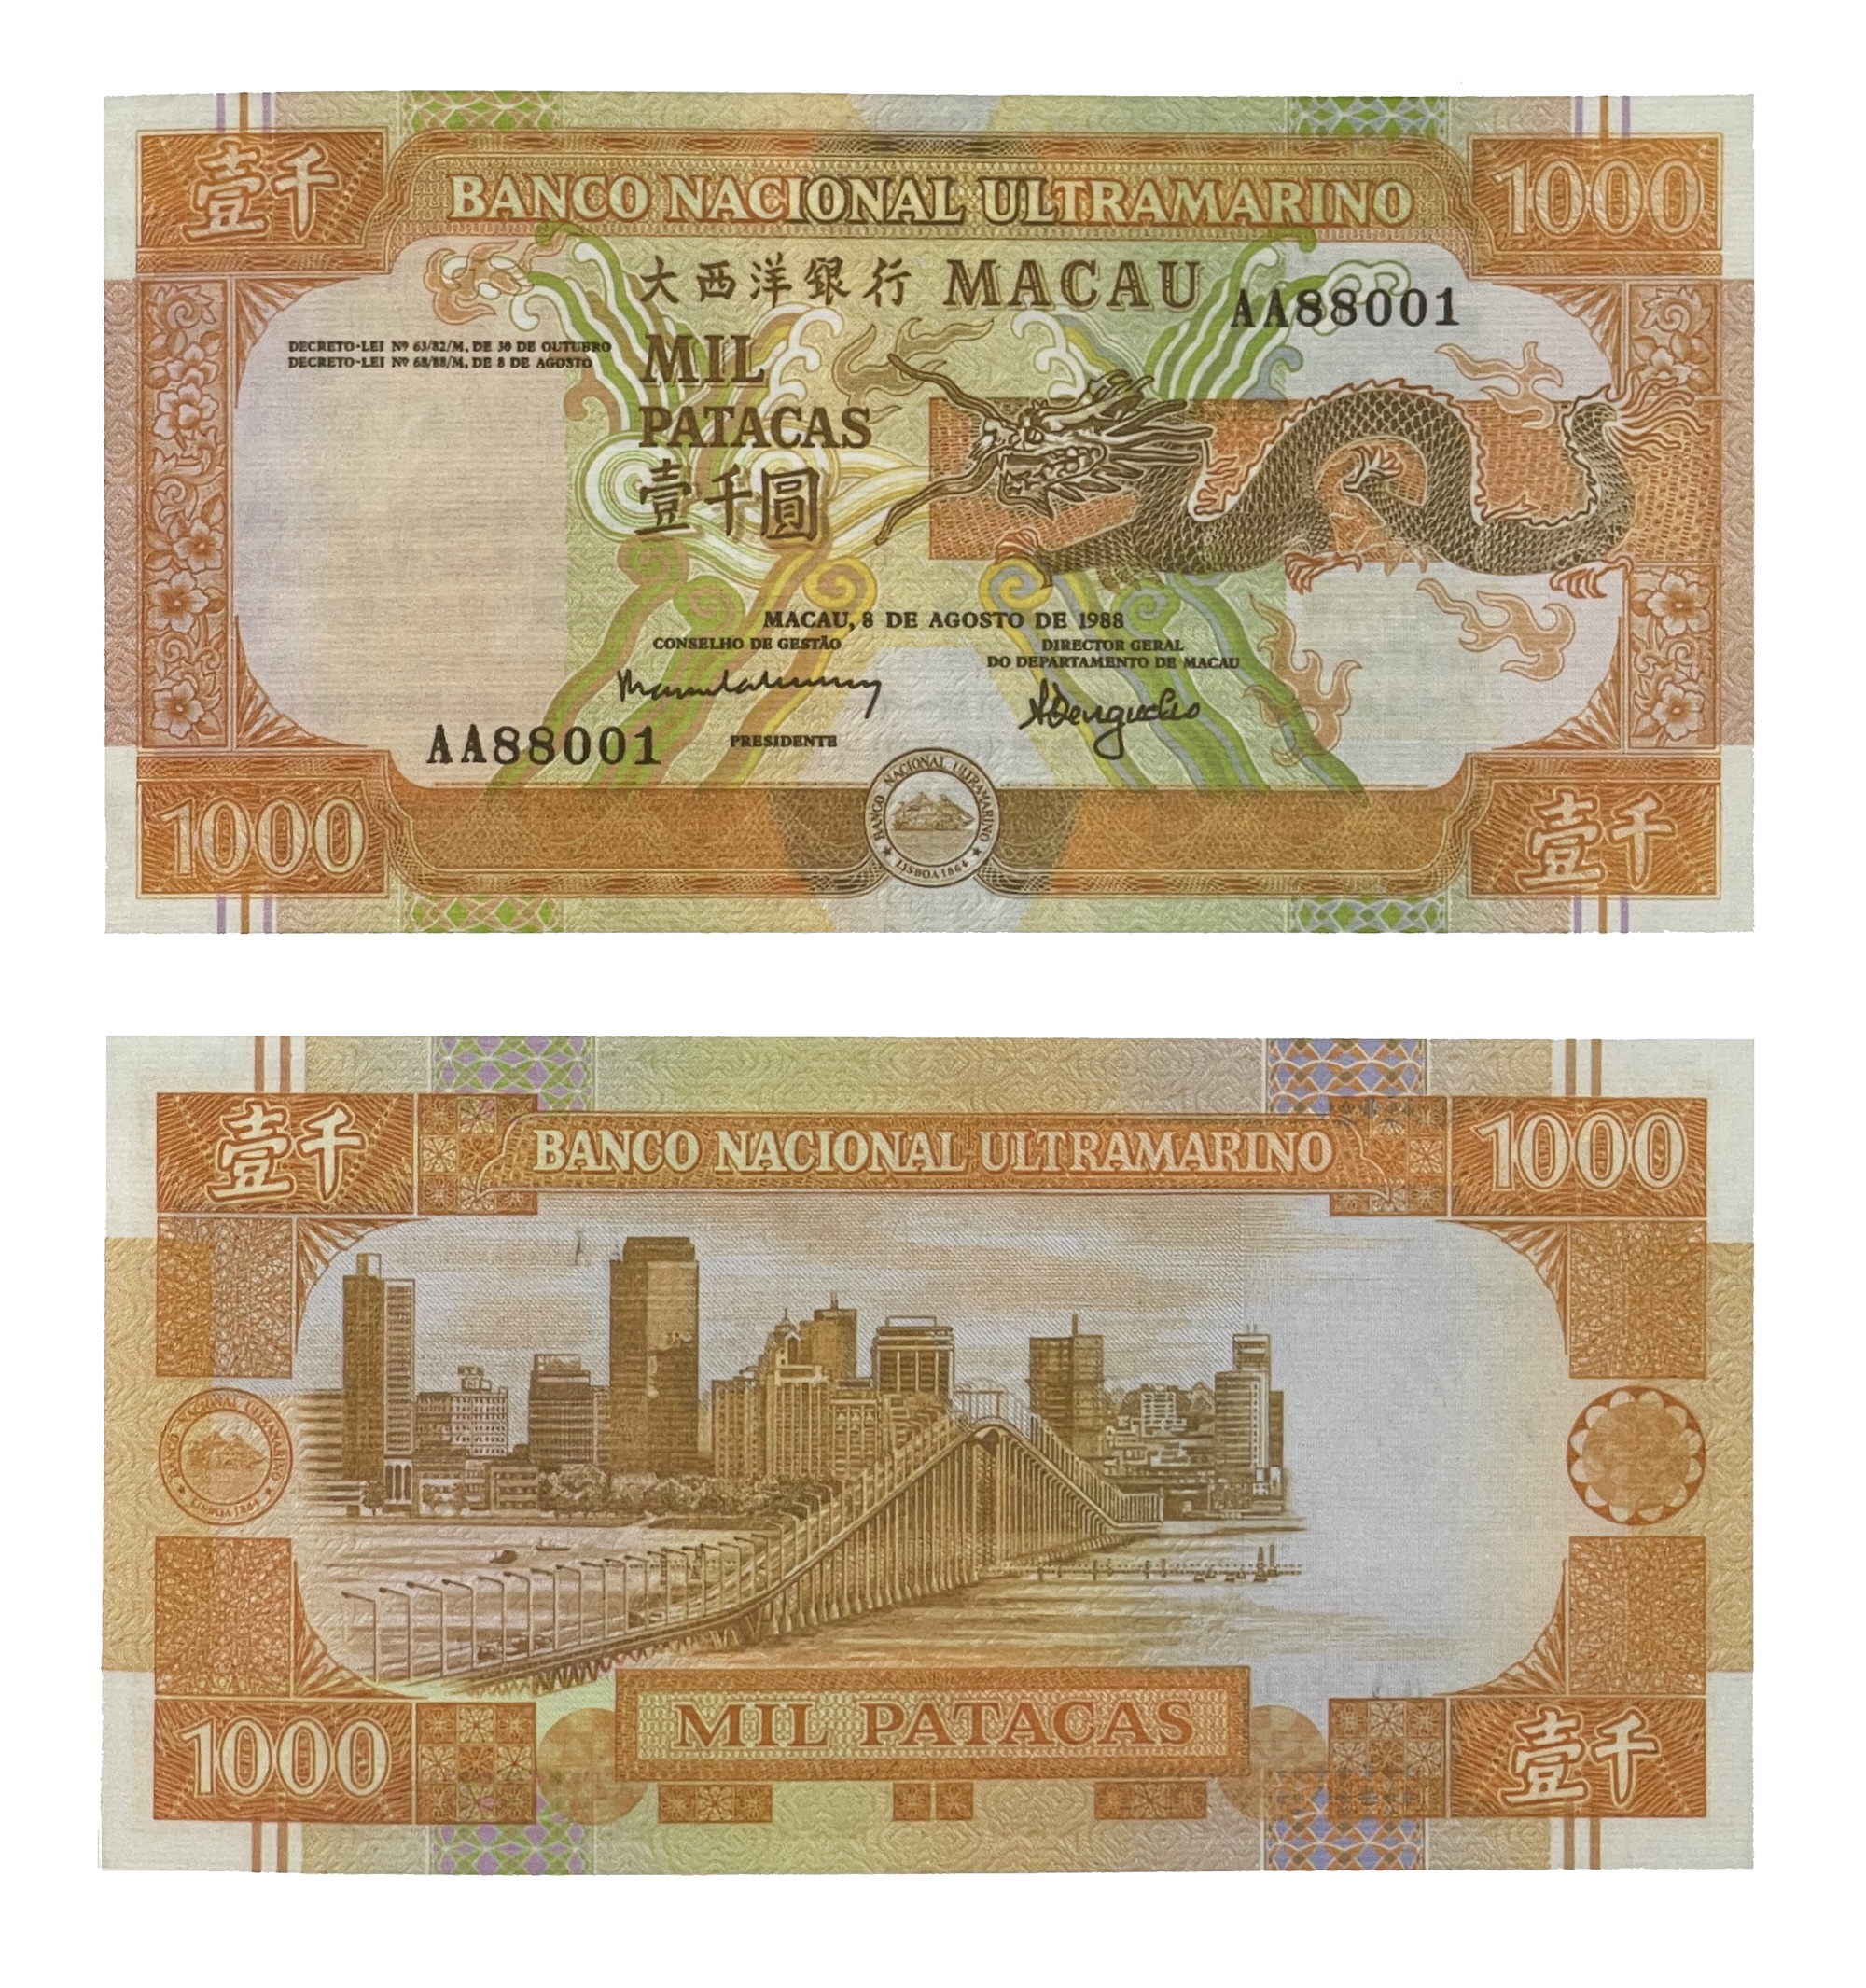 The first 1,000 pataca banknote was released on 8 August 1988